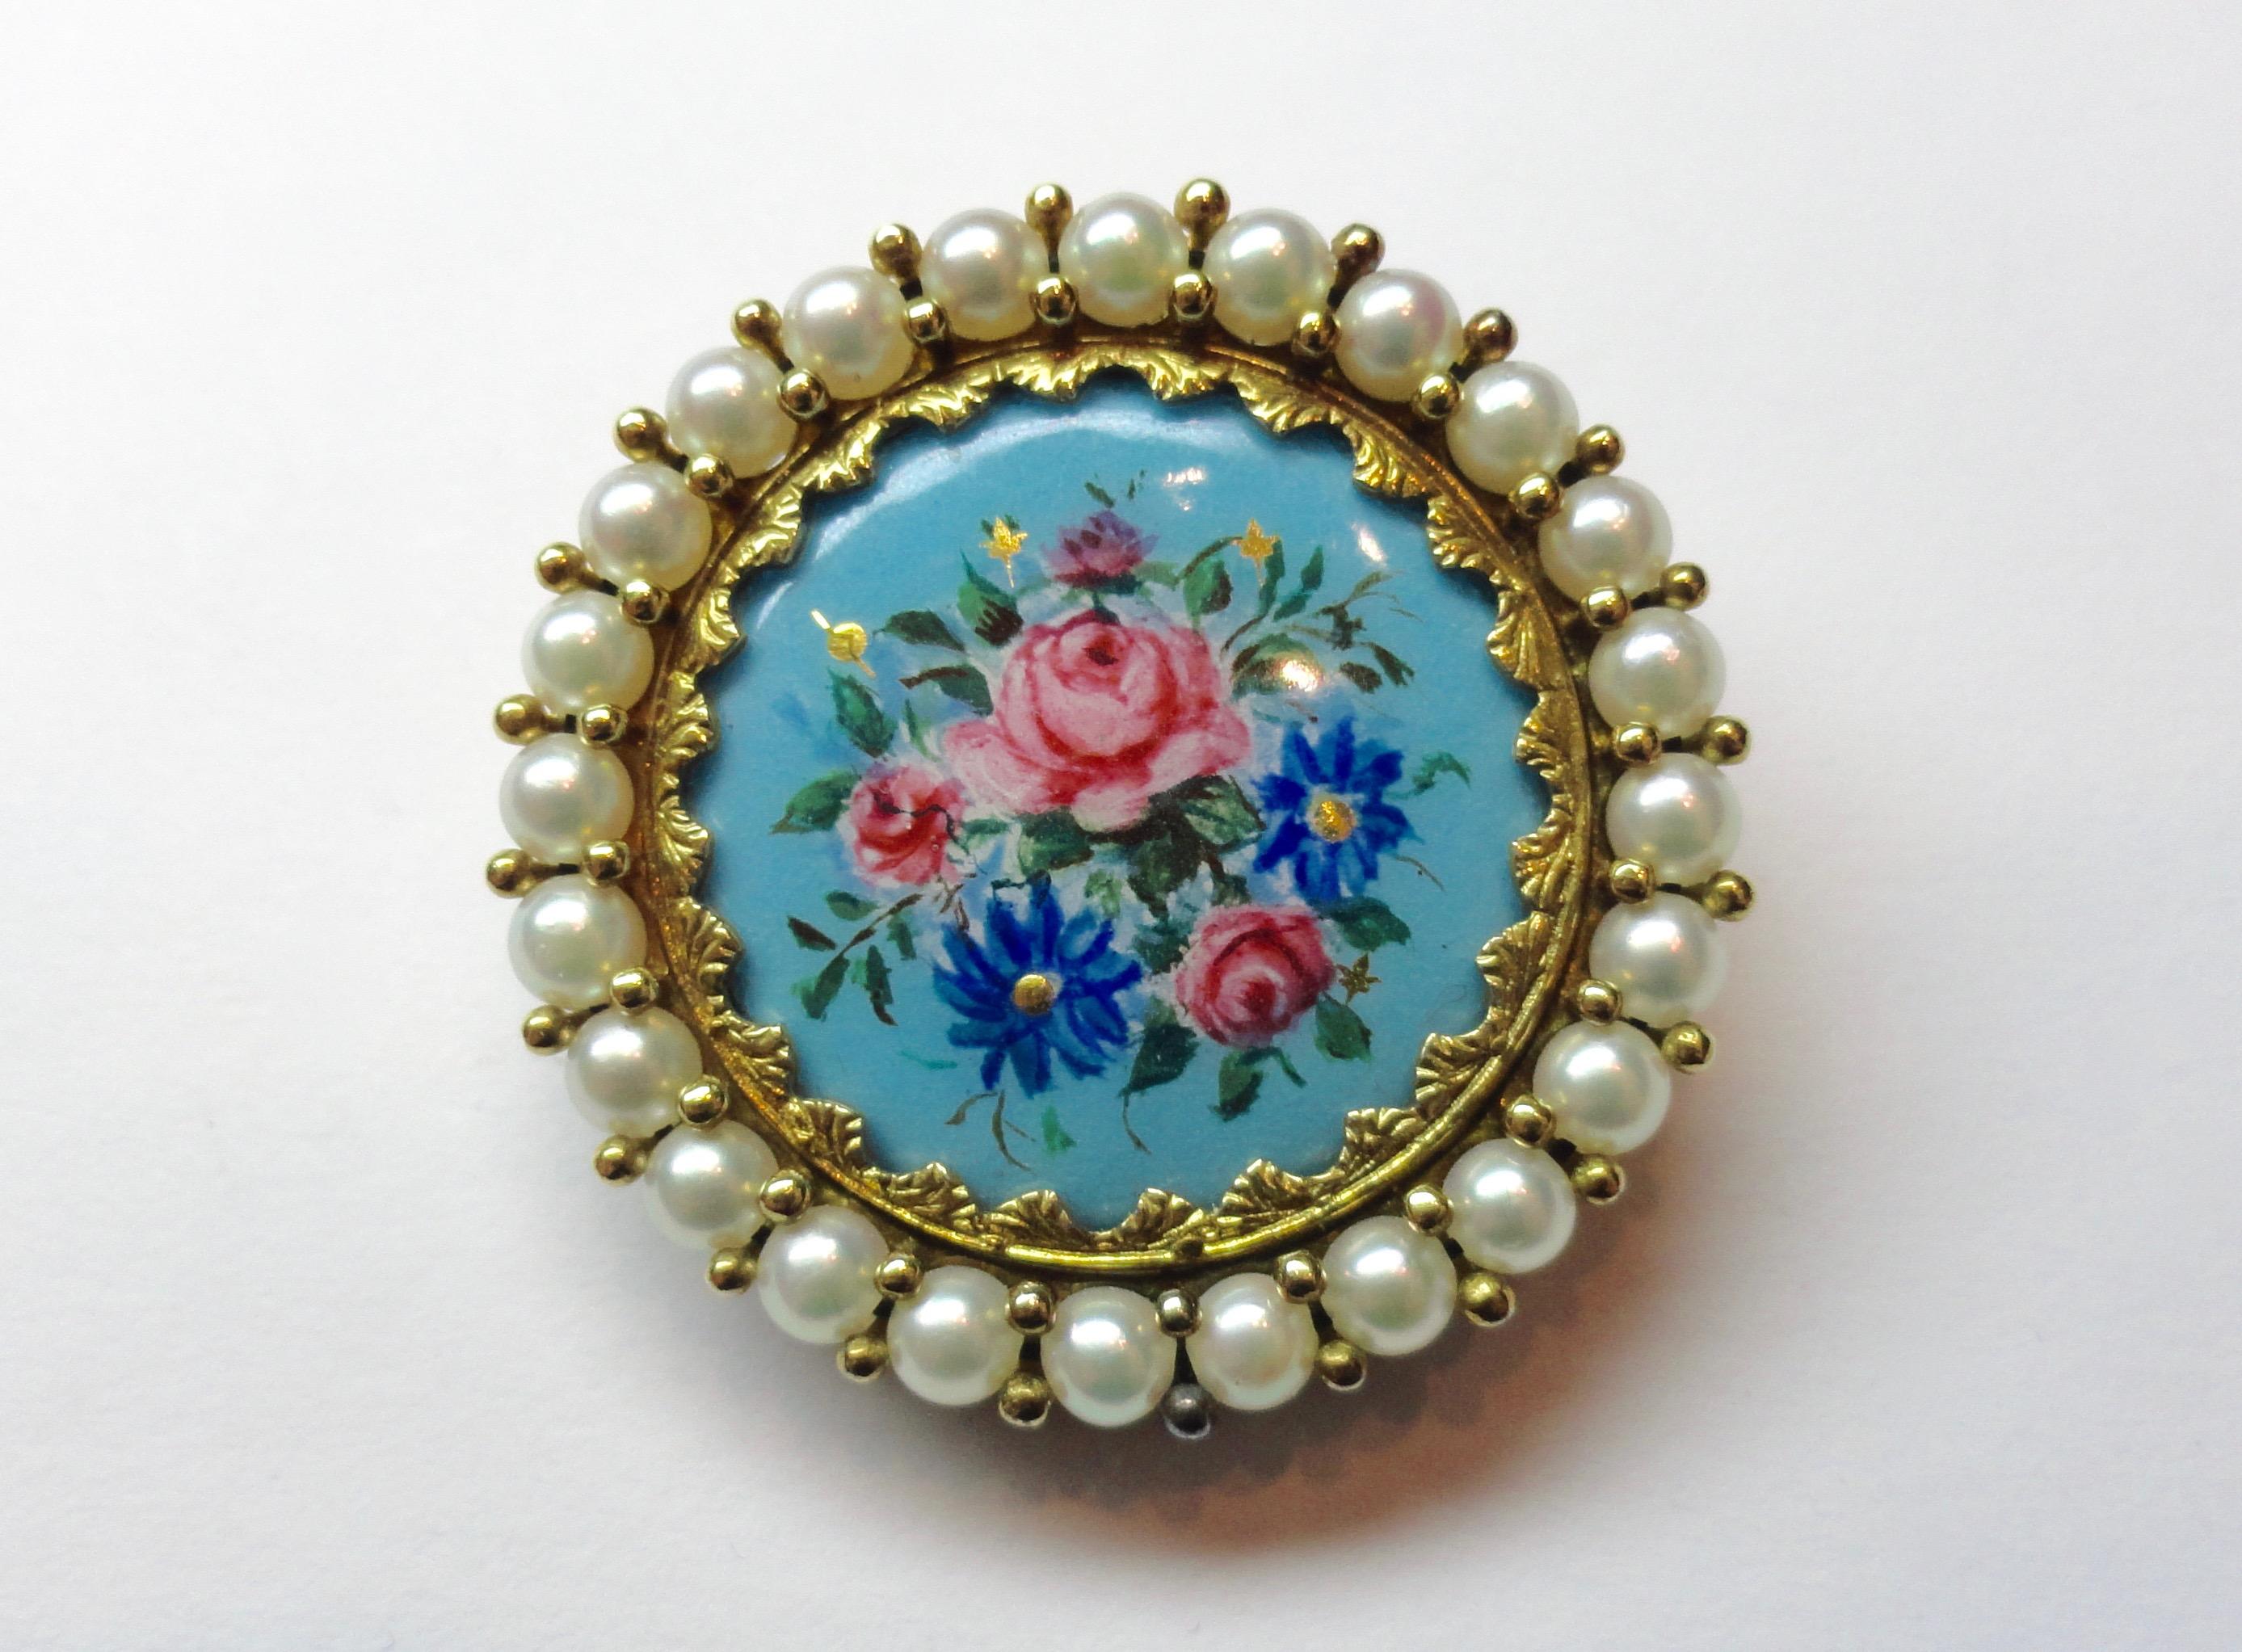 Double use brooch and pendant in 18ct gold with floral enamels finely hand-painted and surrounded by small pearls. From the 1940's circa. Probable Italian provenance.